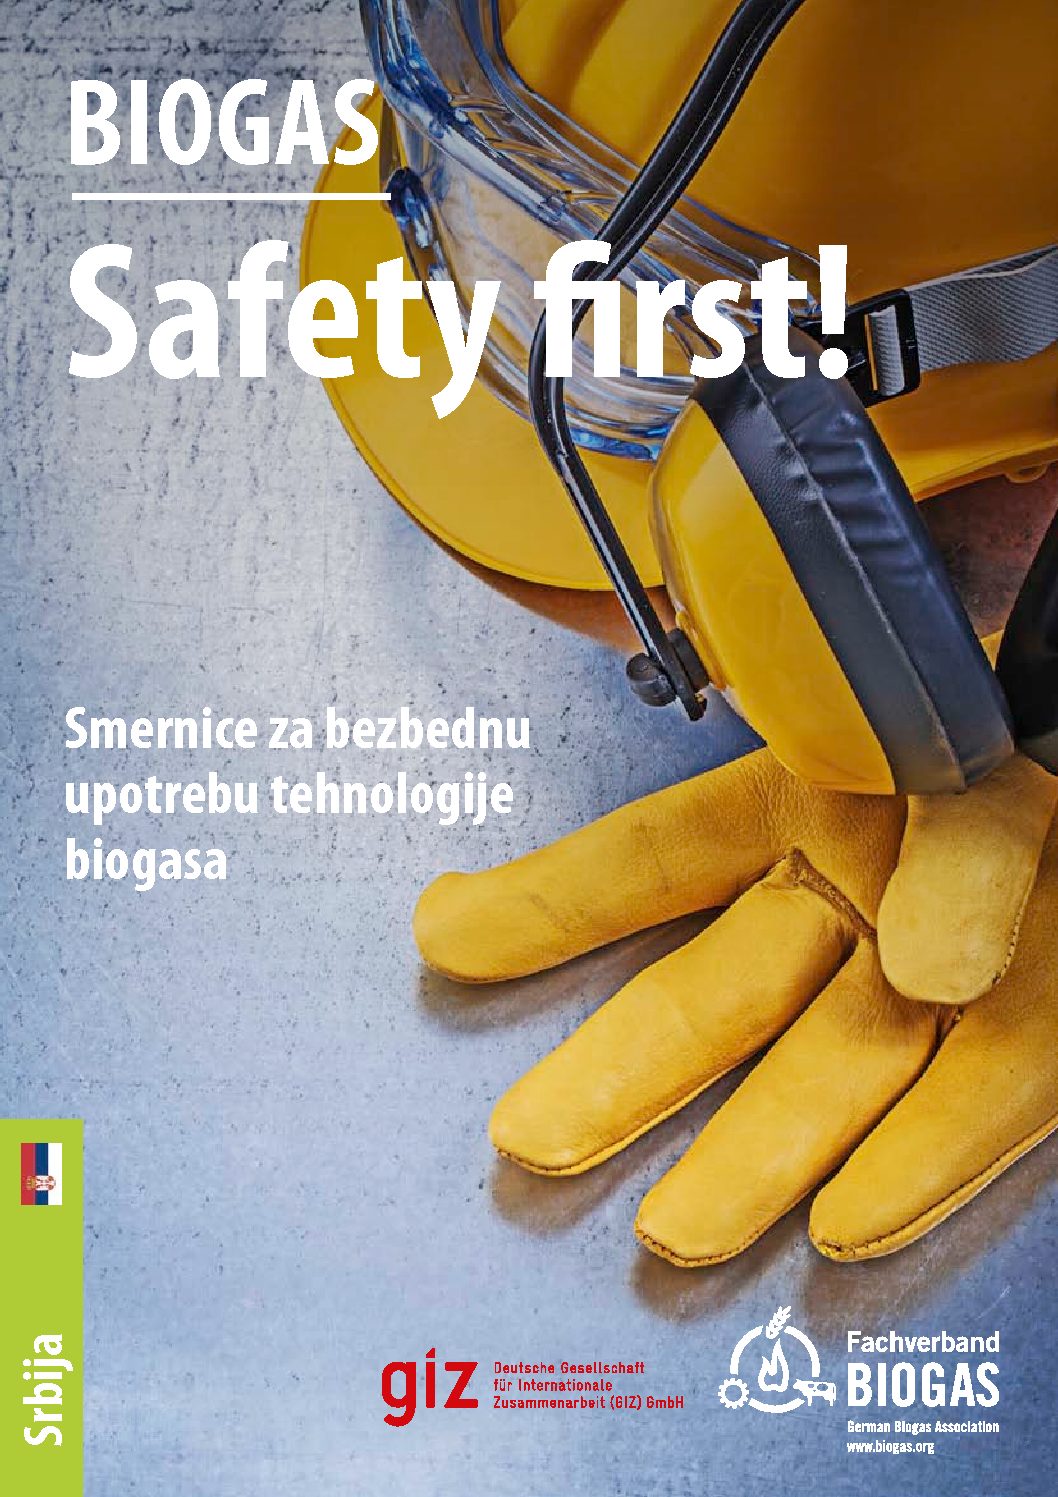 “Safety first – Guidelines for the safe usage of biogas technology” brochure